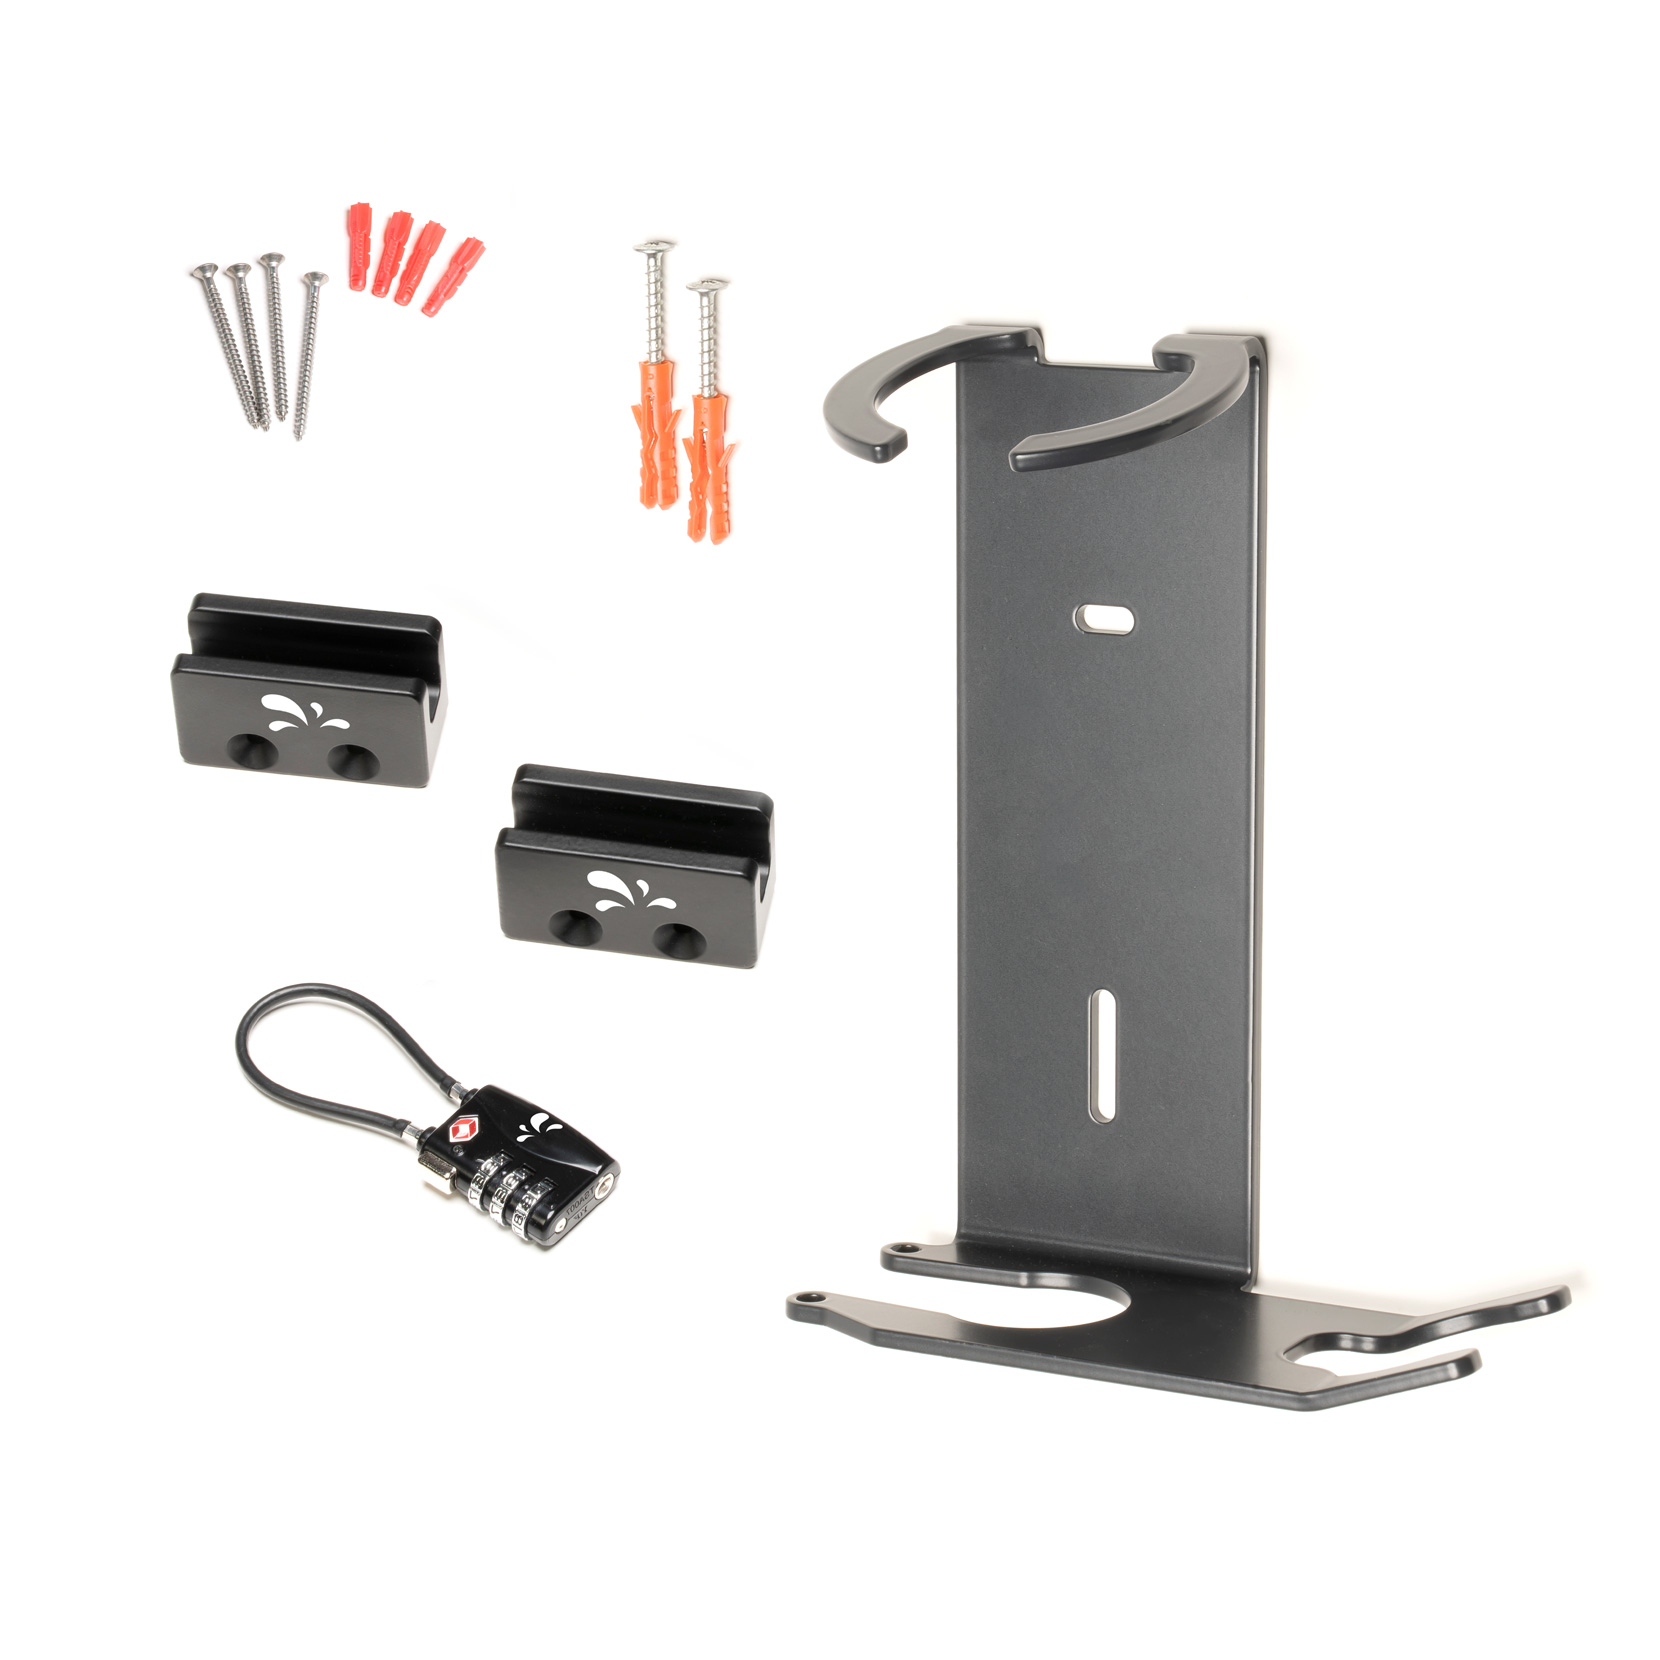 Wall mount set, JUICE BOOSTER 2, Accessories, Accessories